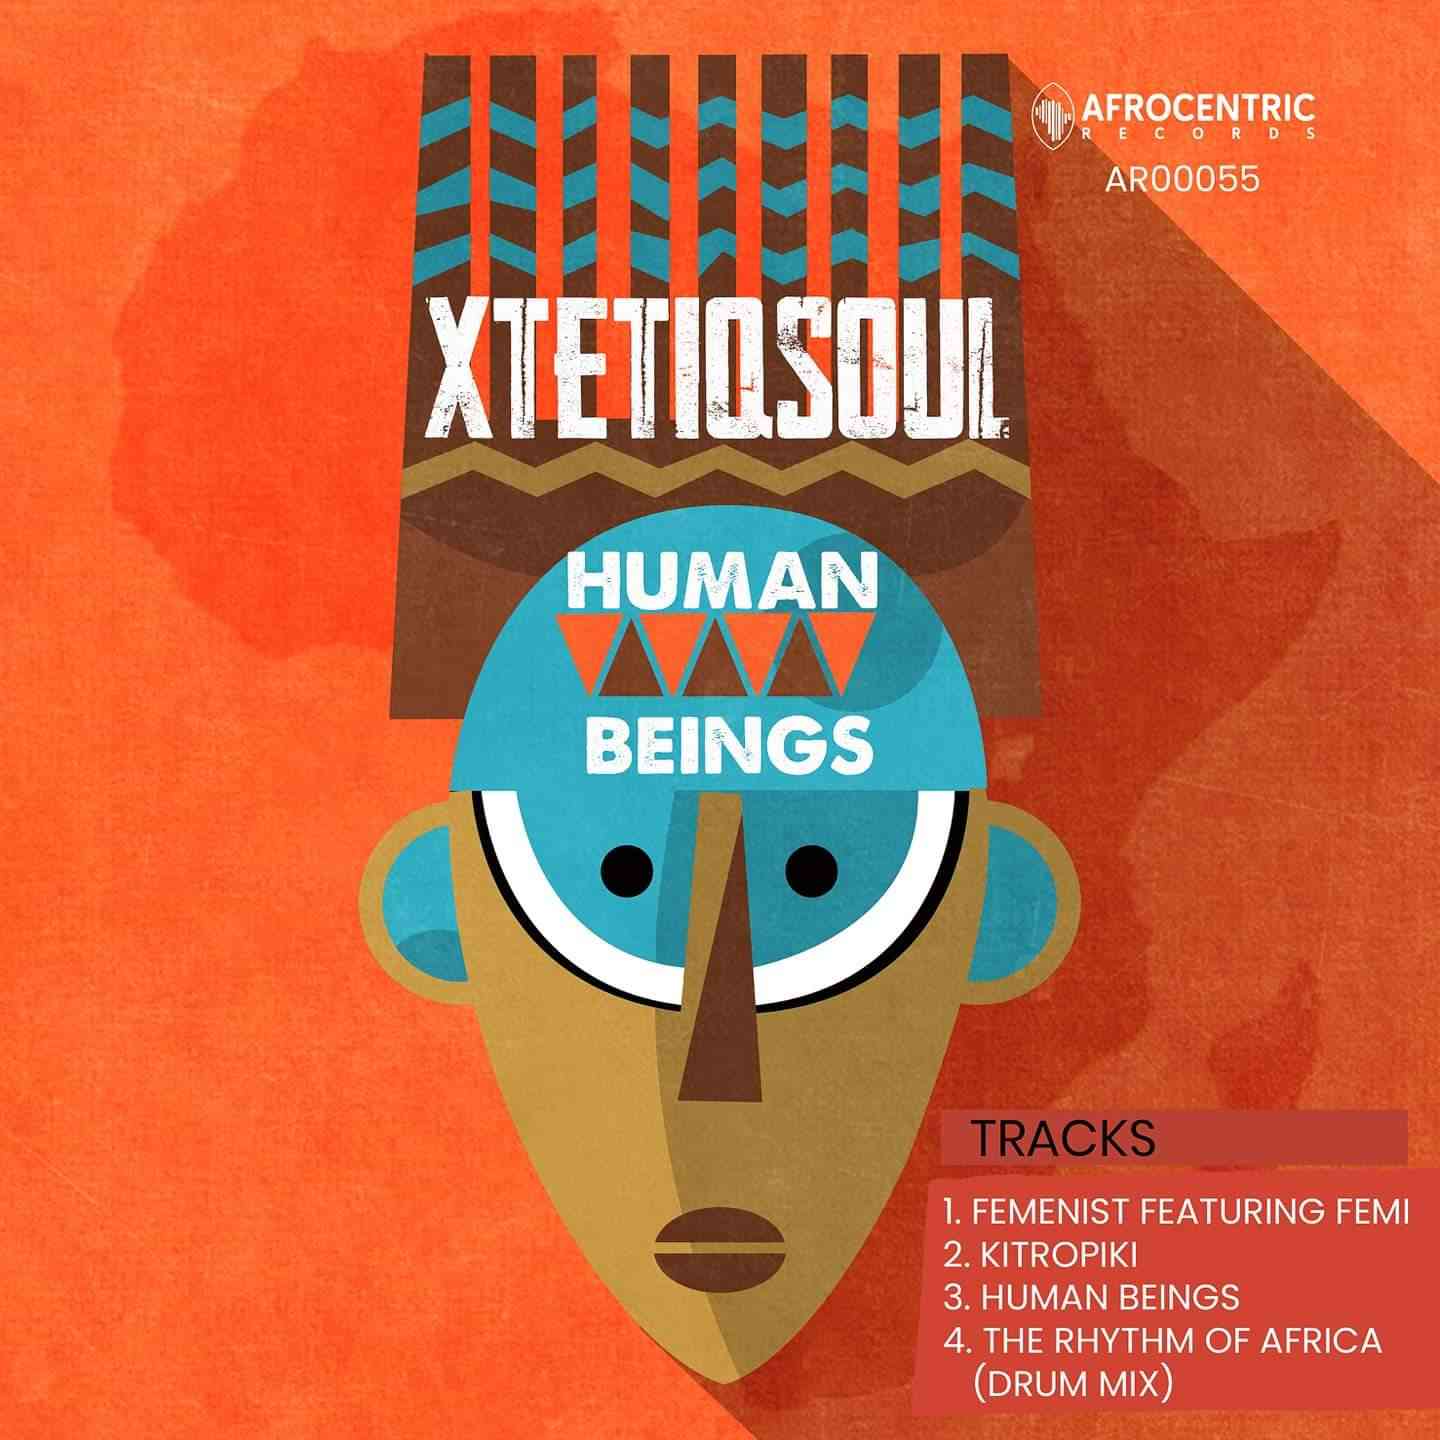 Xtetiqsoul Set The Floor Open With Human Beings EP